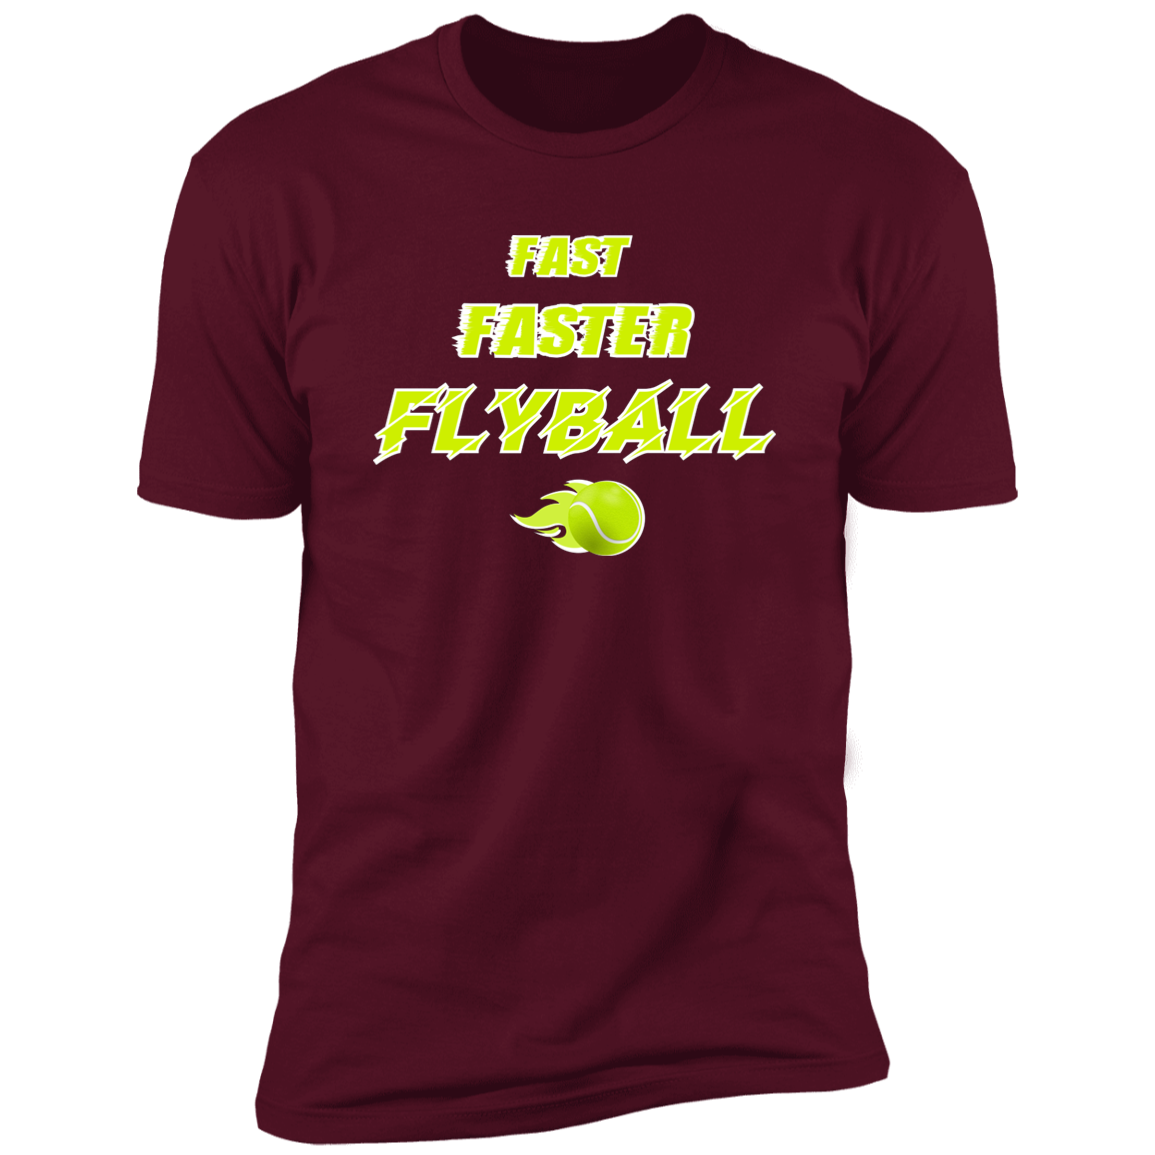 Fast Faster Flyball Dog T-shirt, sporting dog t-shirt, flyball t-shirt, in maroon